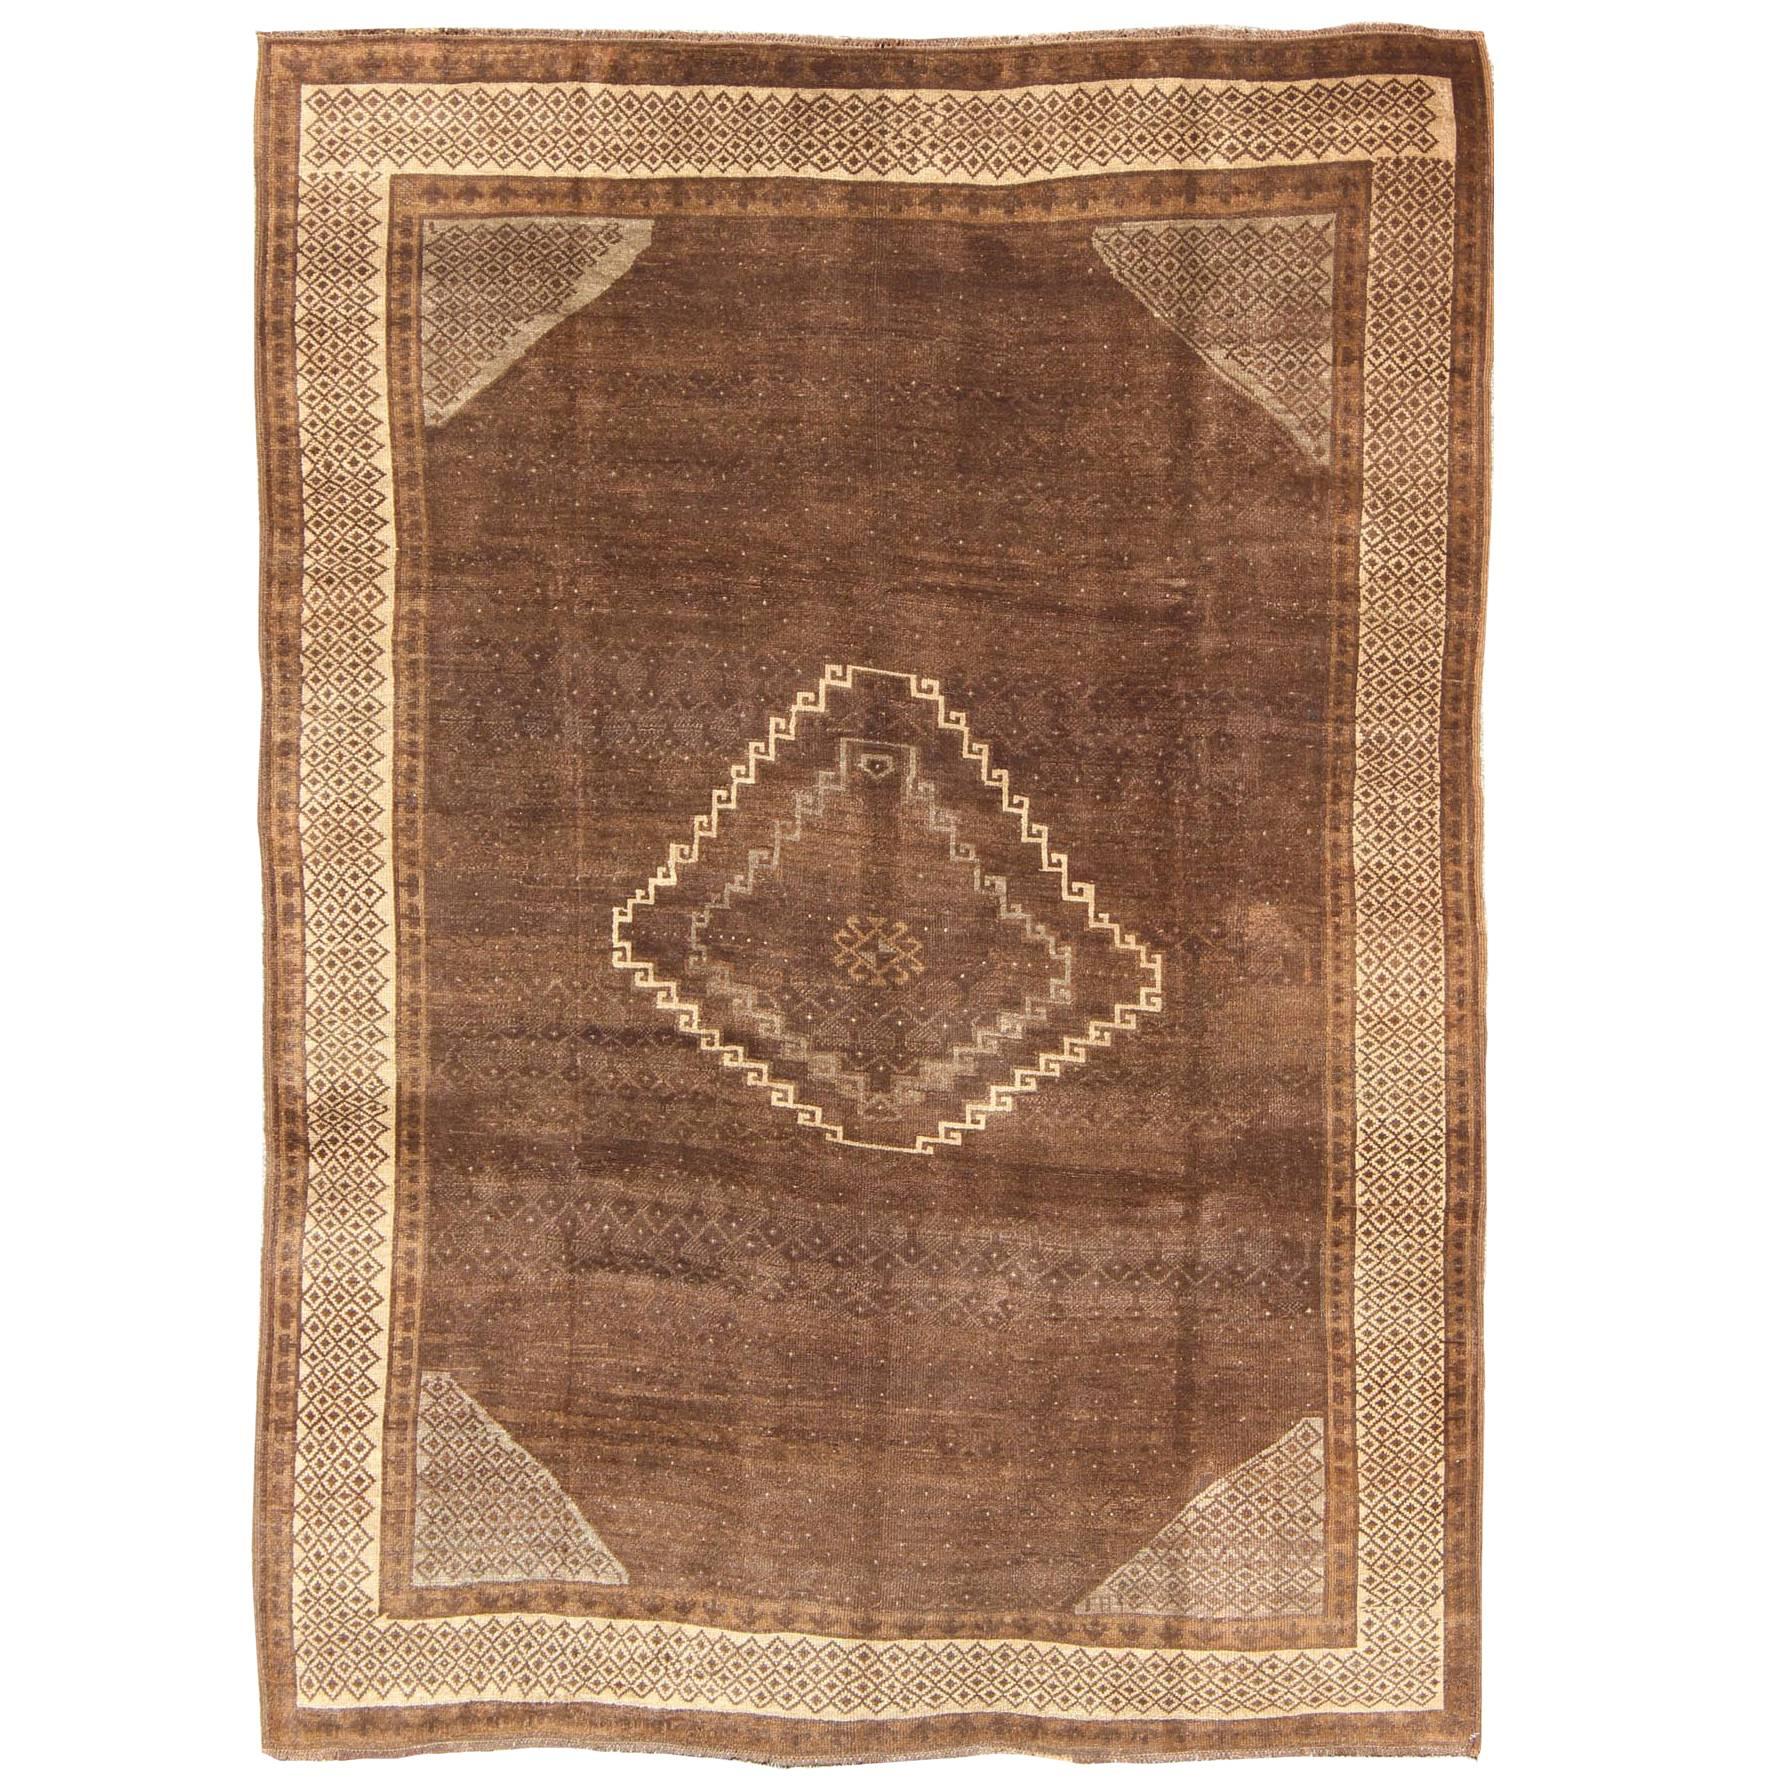 Vintage Turkish Kars Rug with a Modern Design in Shades of Brown and Ivory